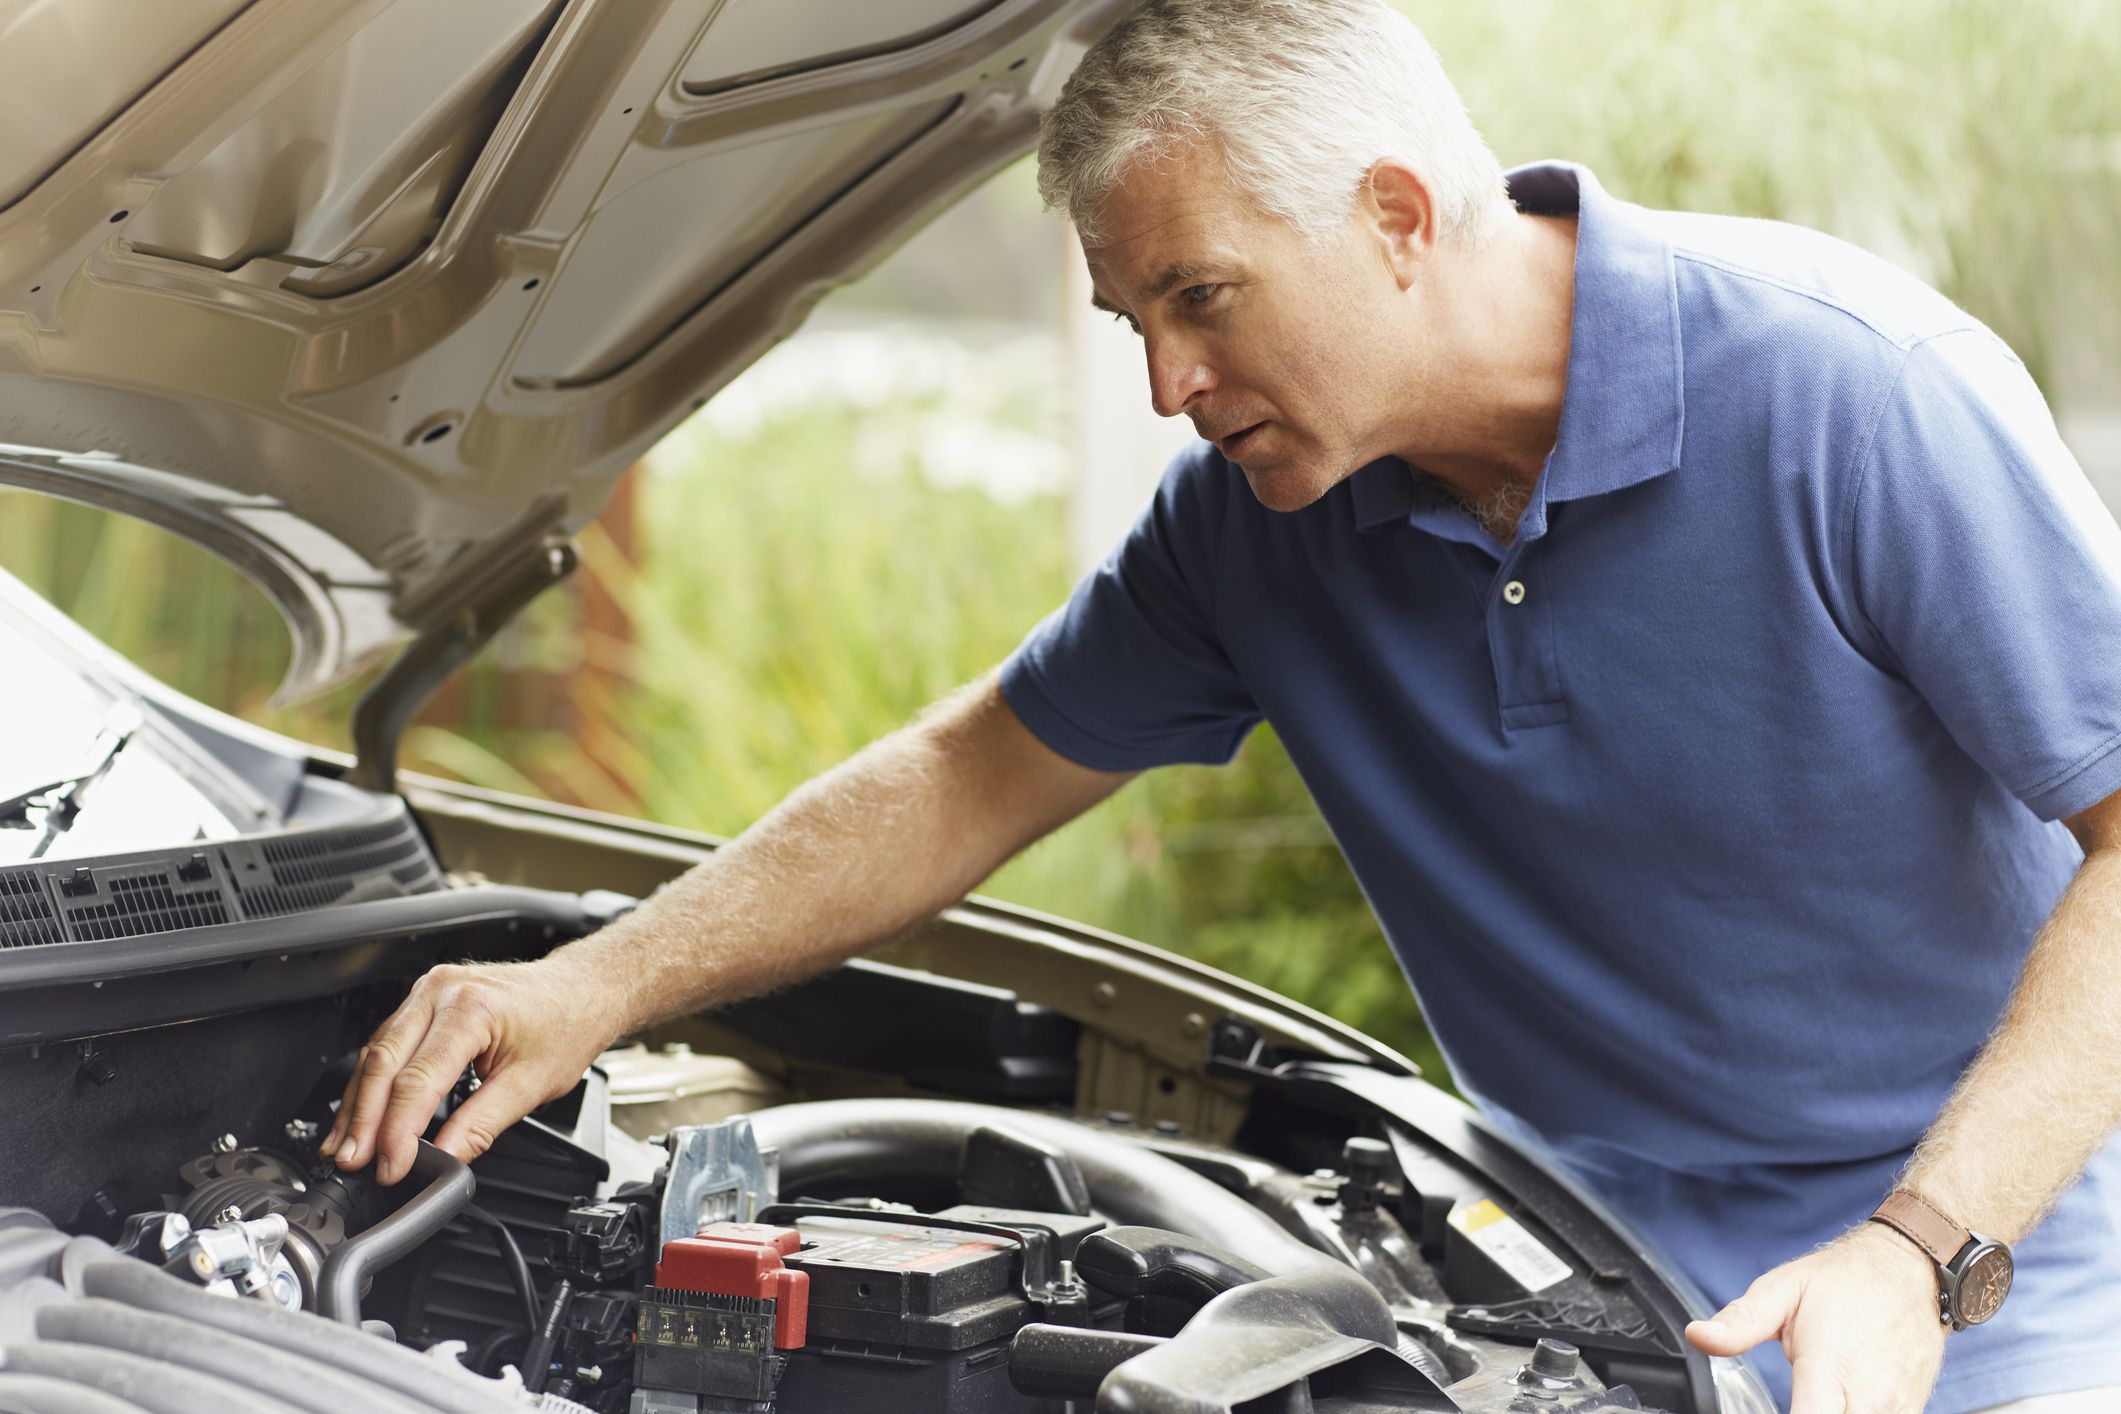 Deciding Whether or Not to Repair a Used Car